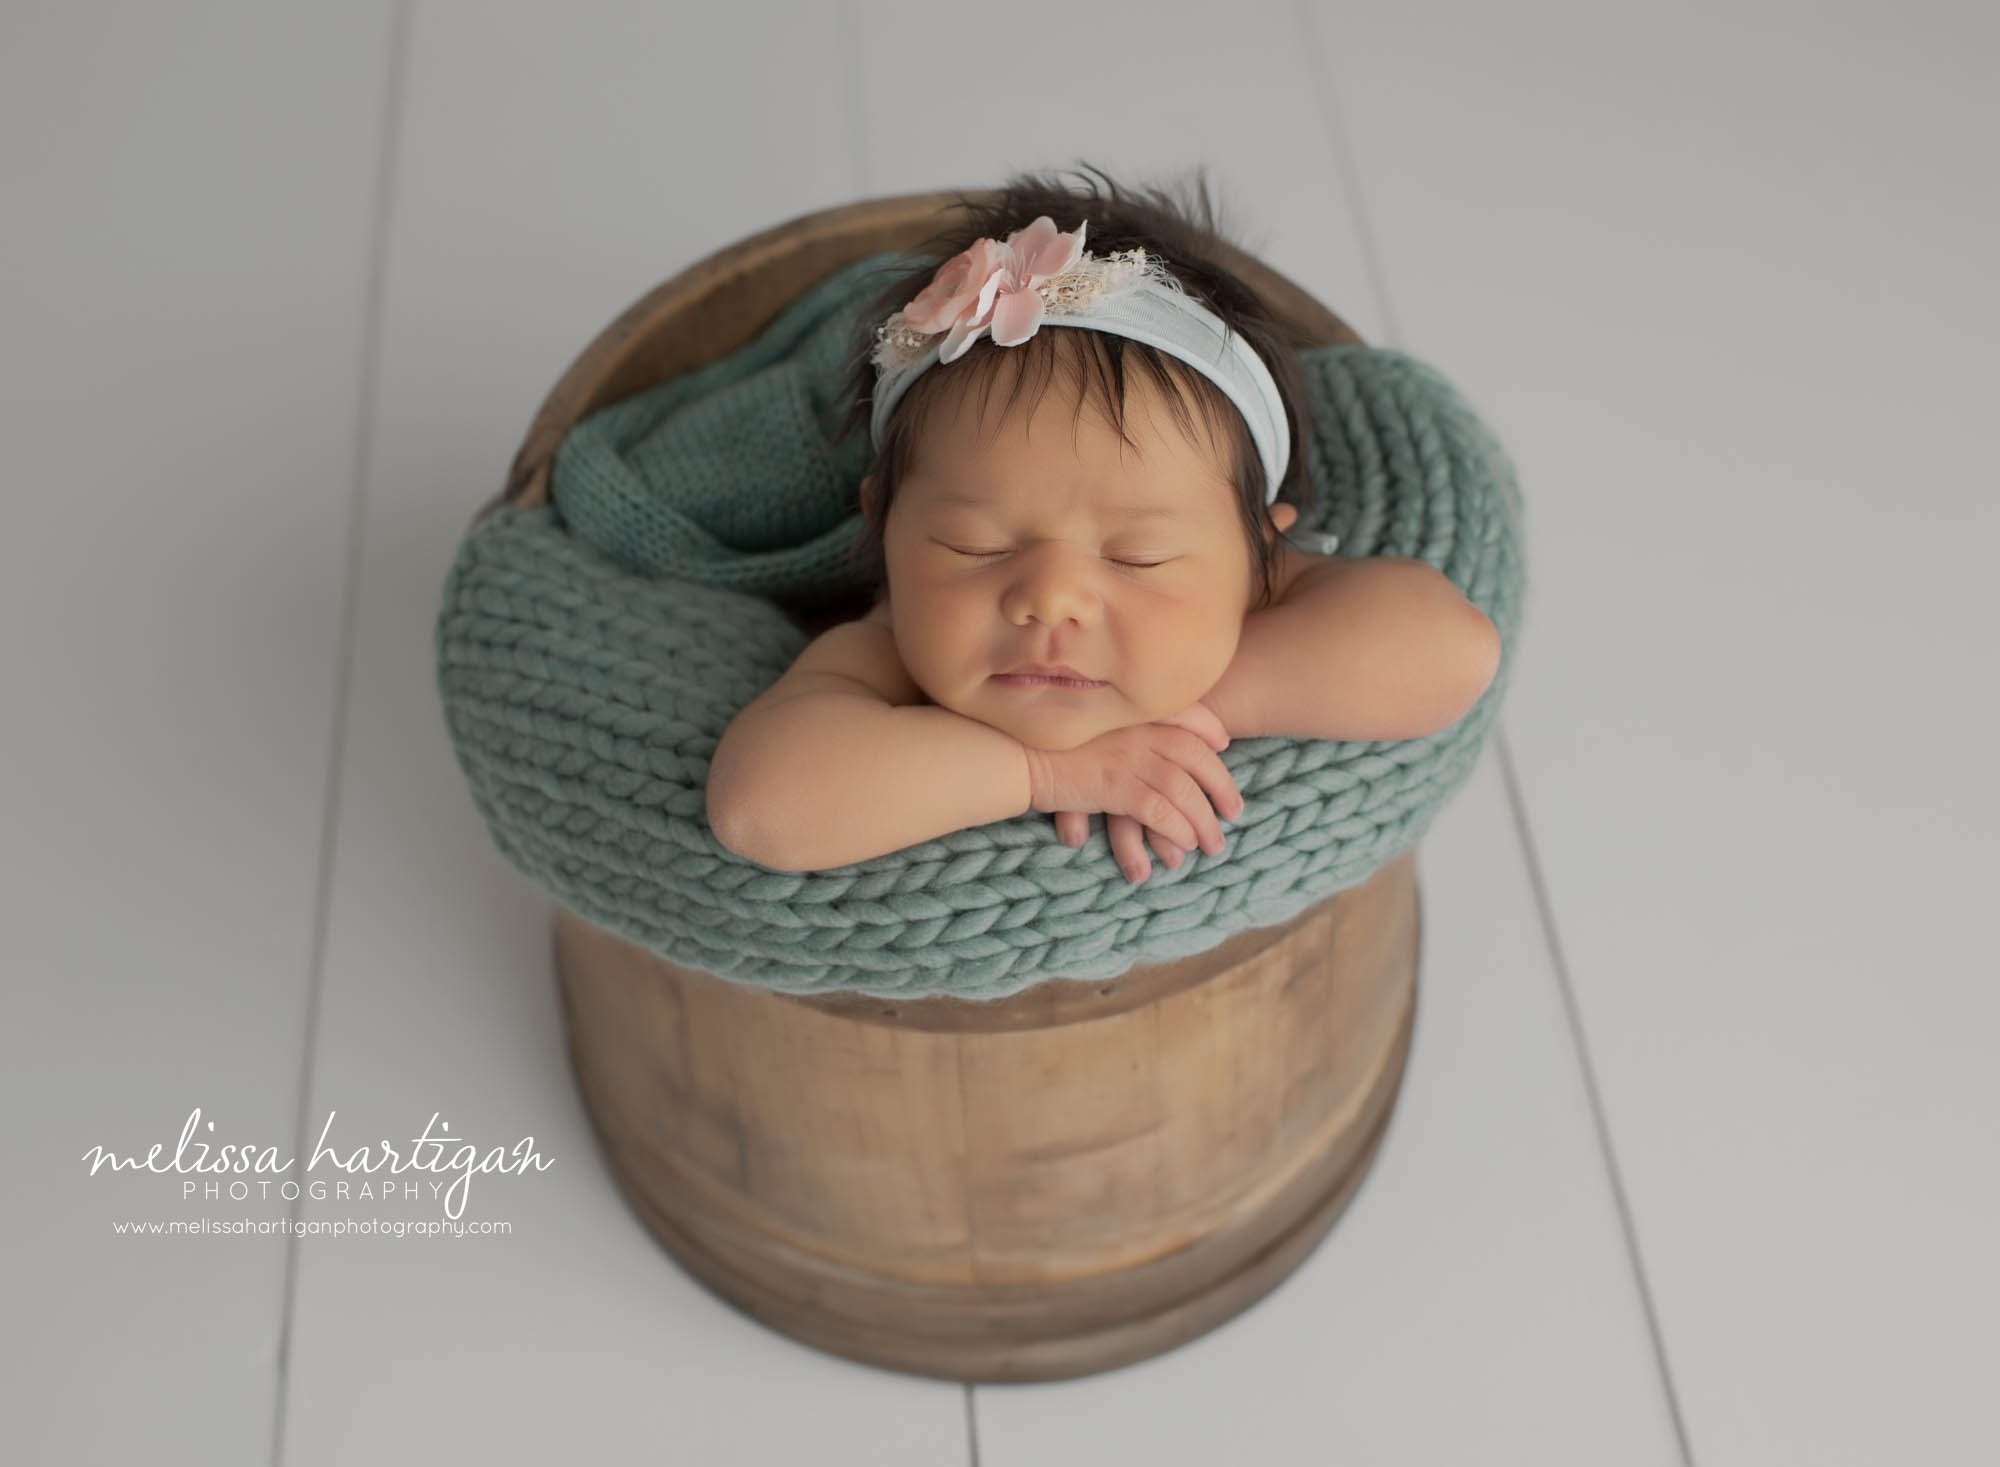 newborn baby girl posed in wooden bucket with dark sea green knitted layer and flower headband